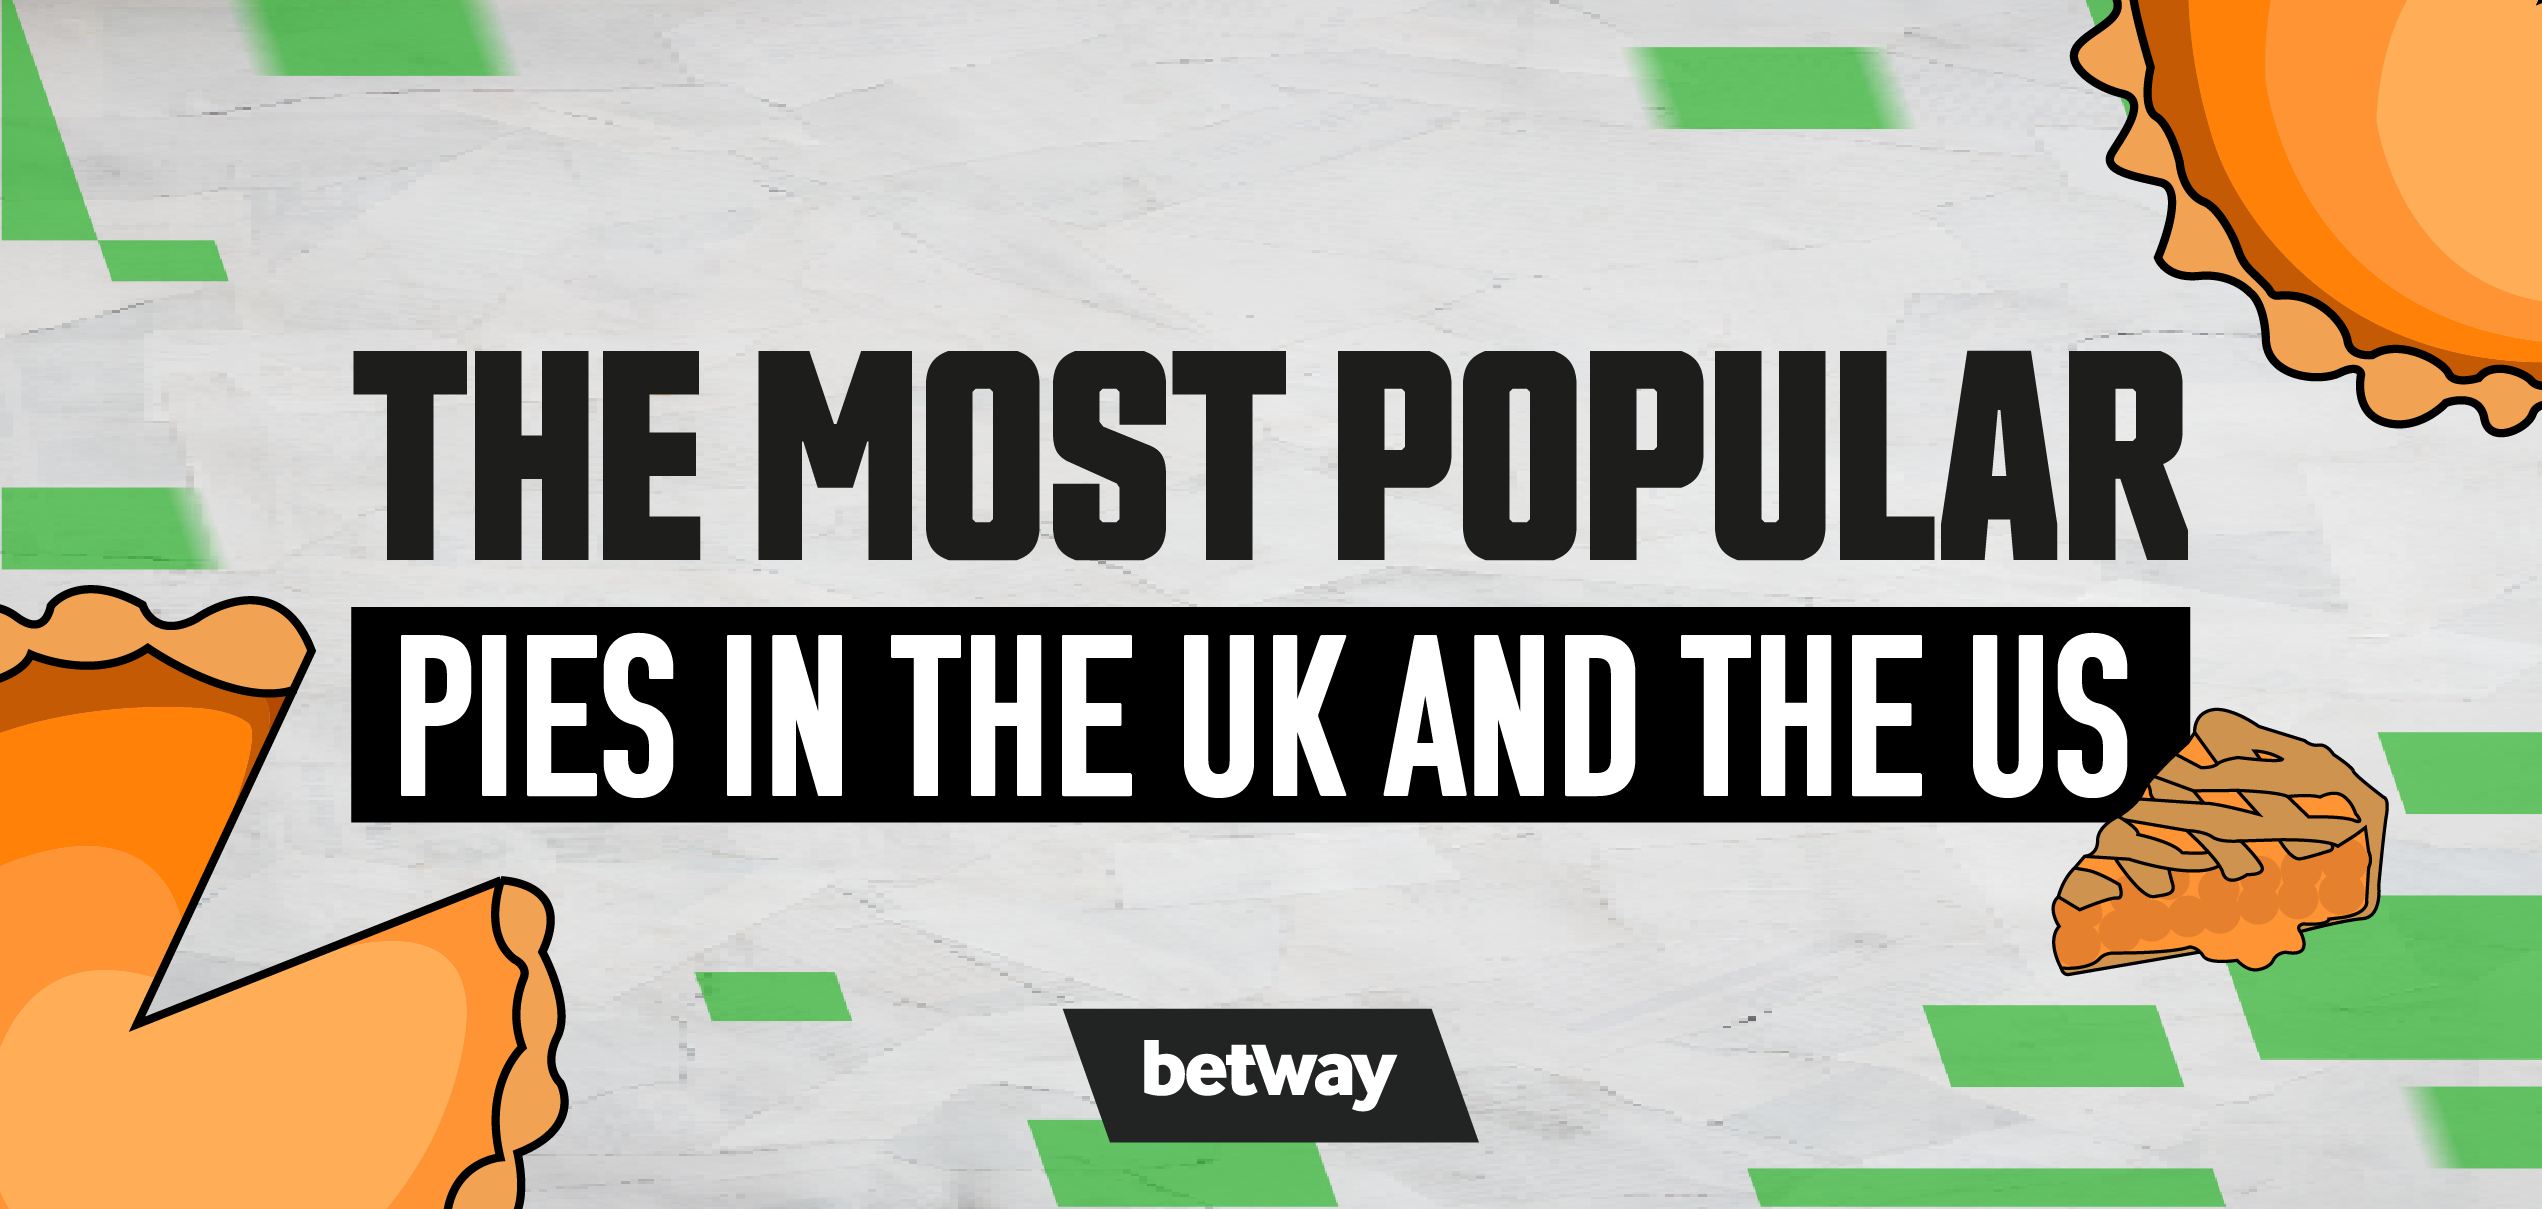 The Most Popular Pies in the UK and the US